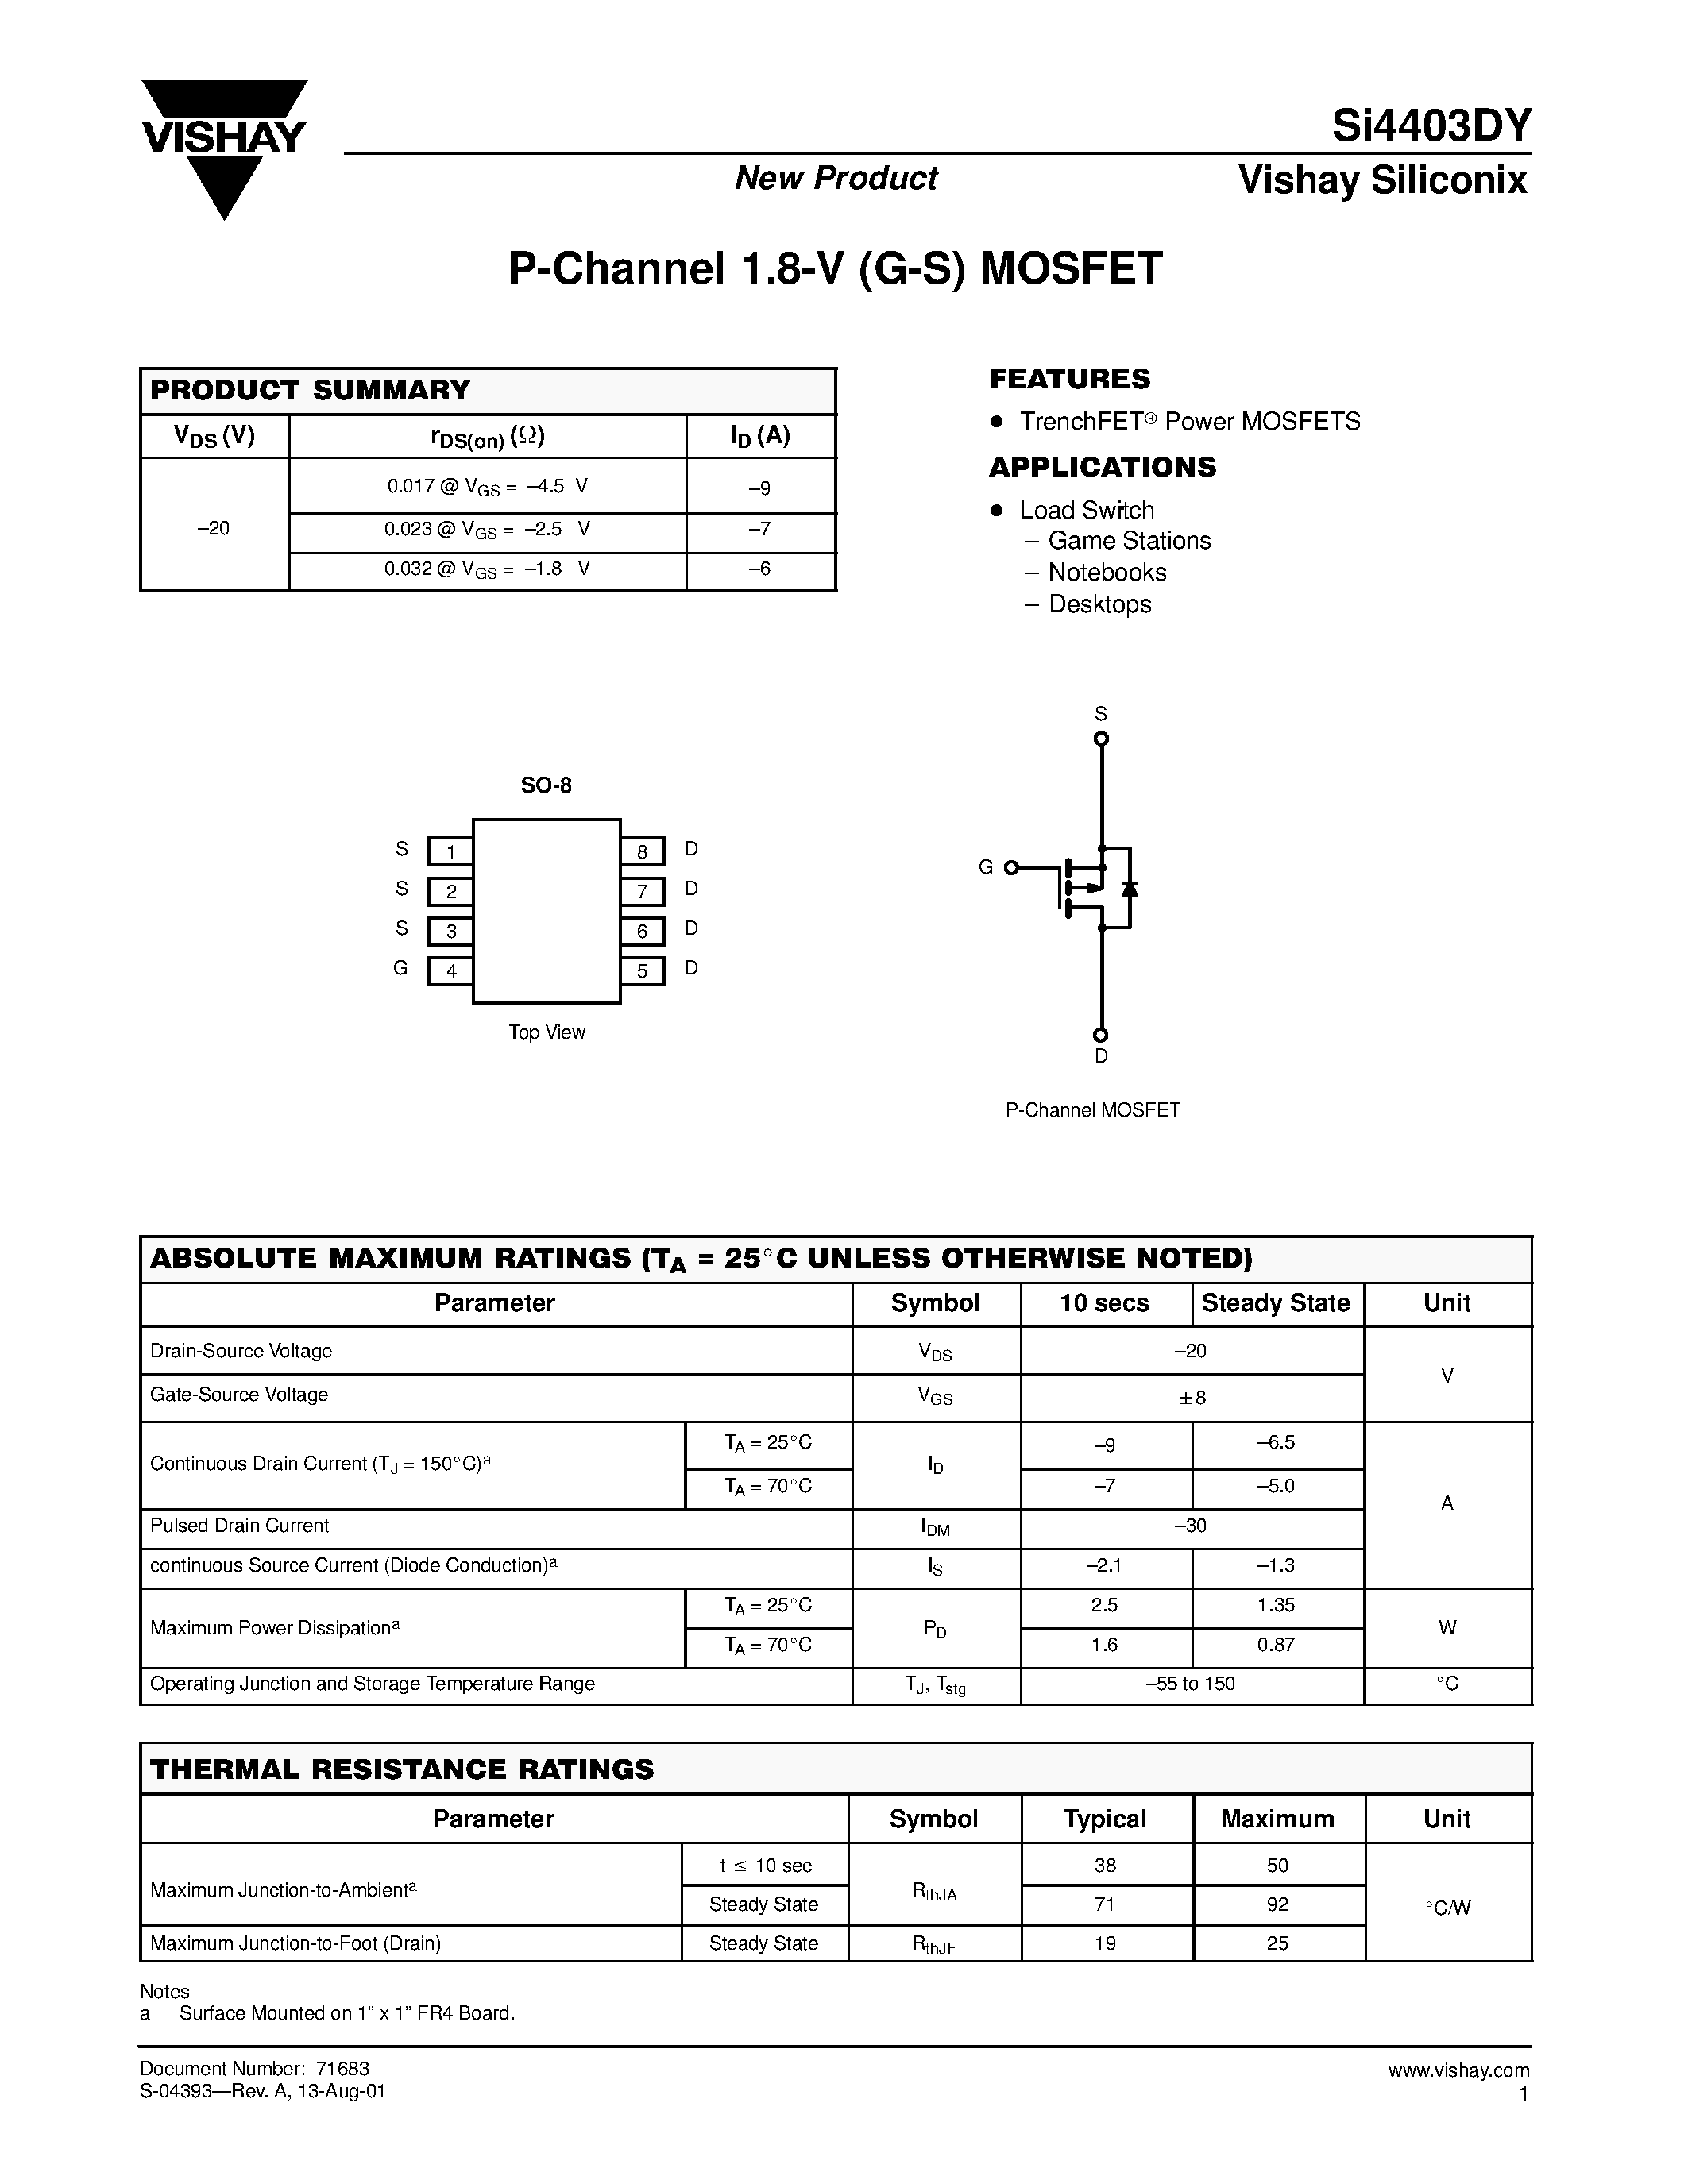 Datasheet SI4403DY - P-Channel 1.8-V (G-S) MOSFET page 1